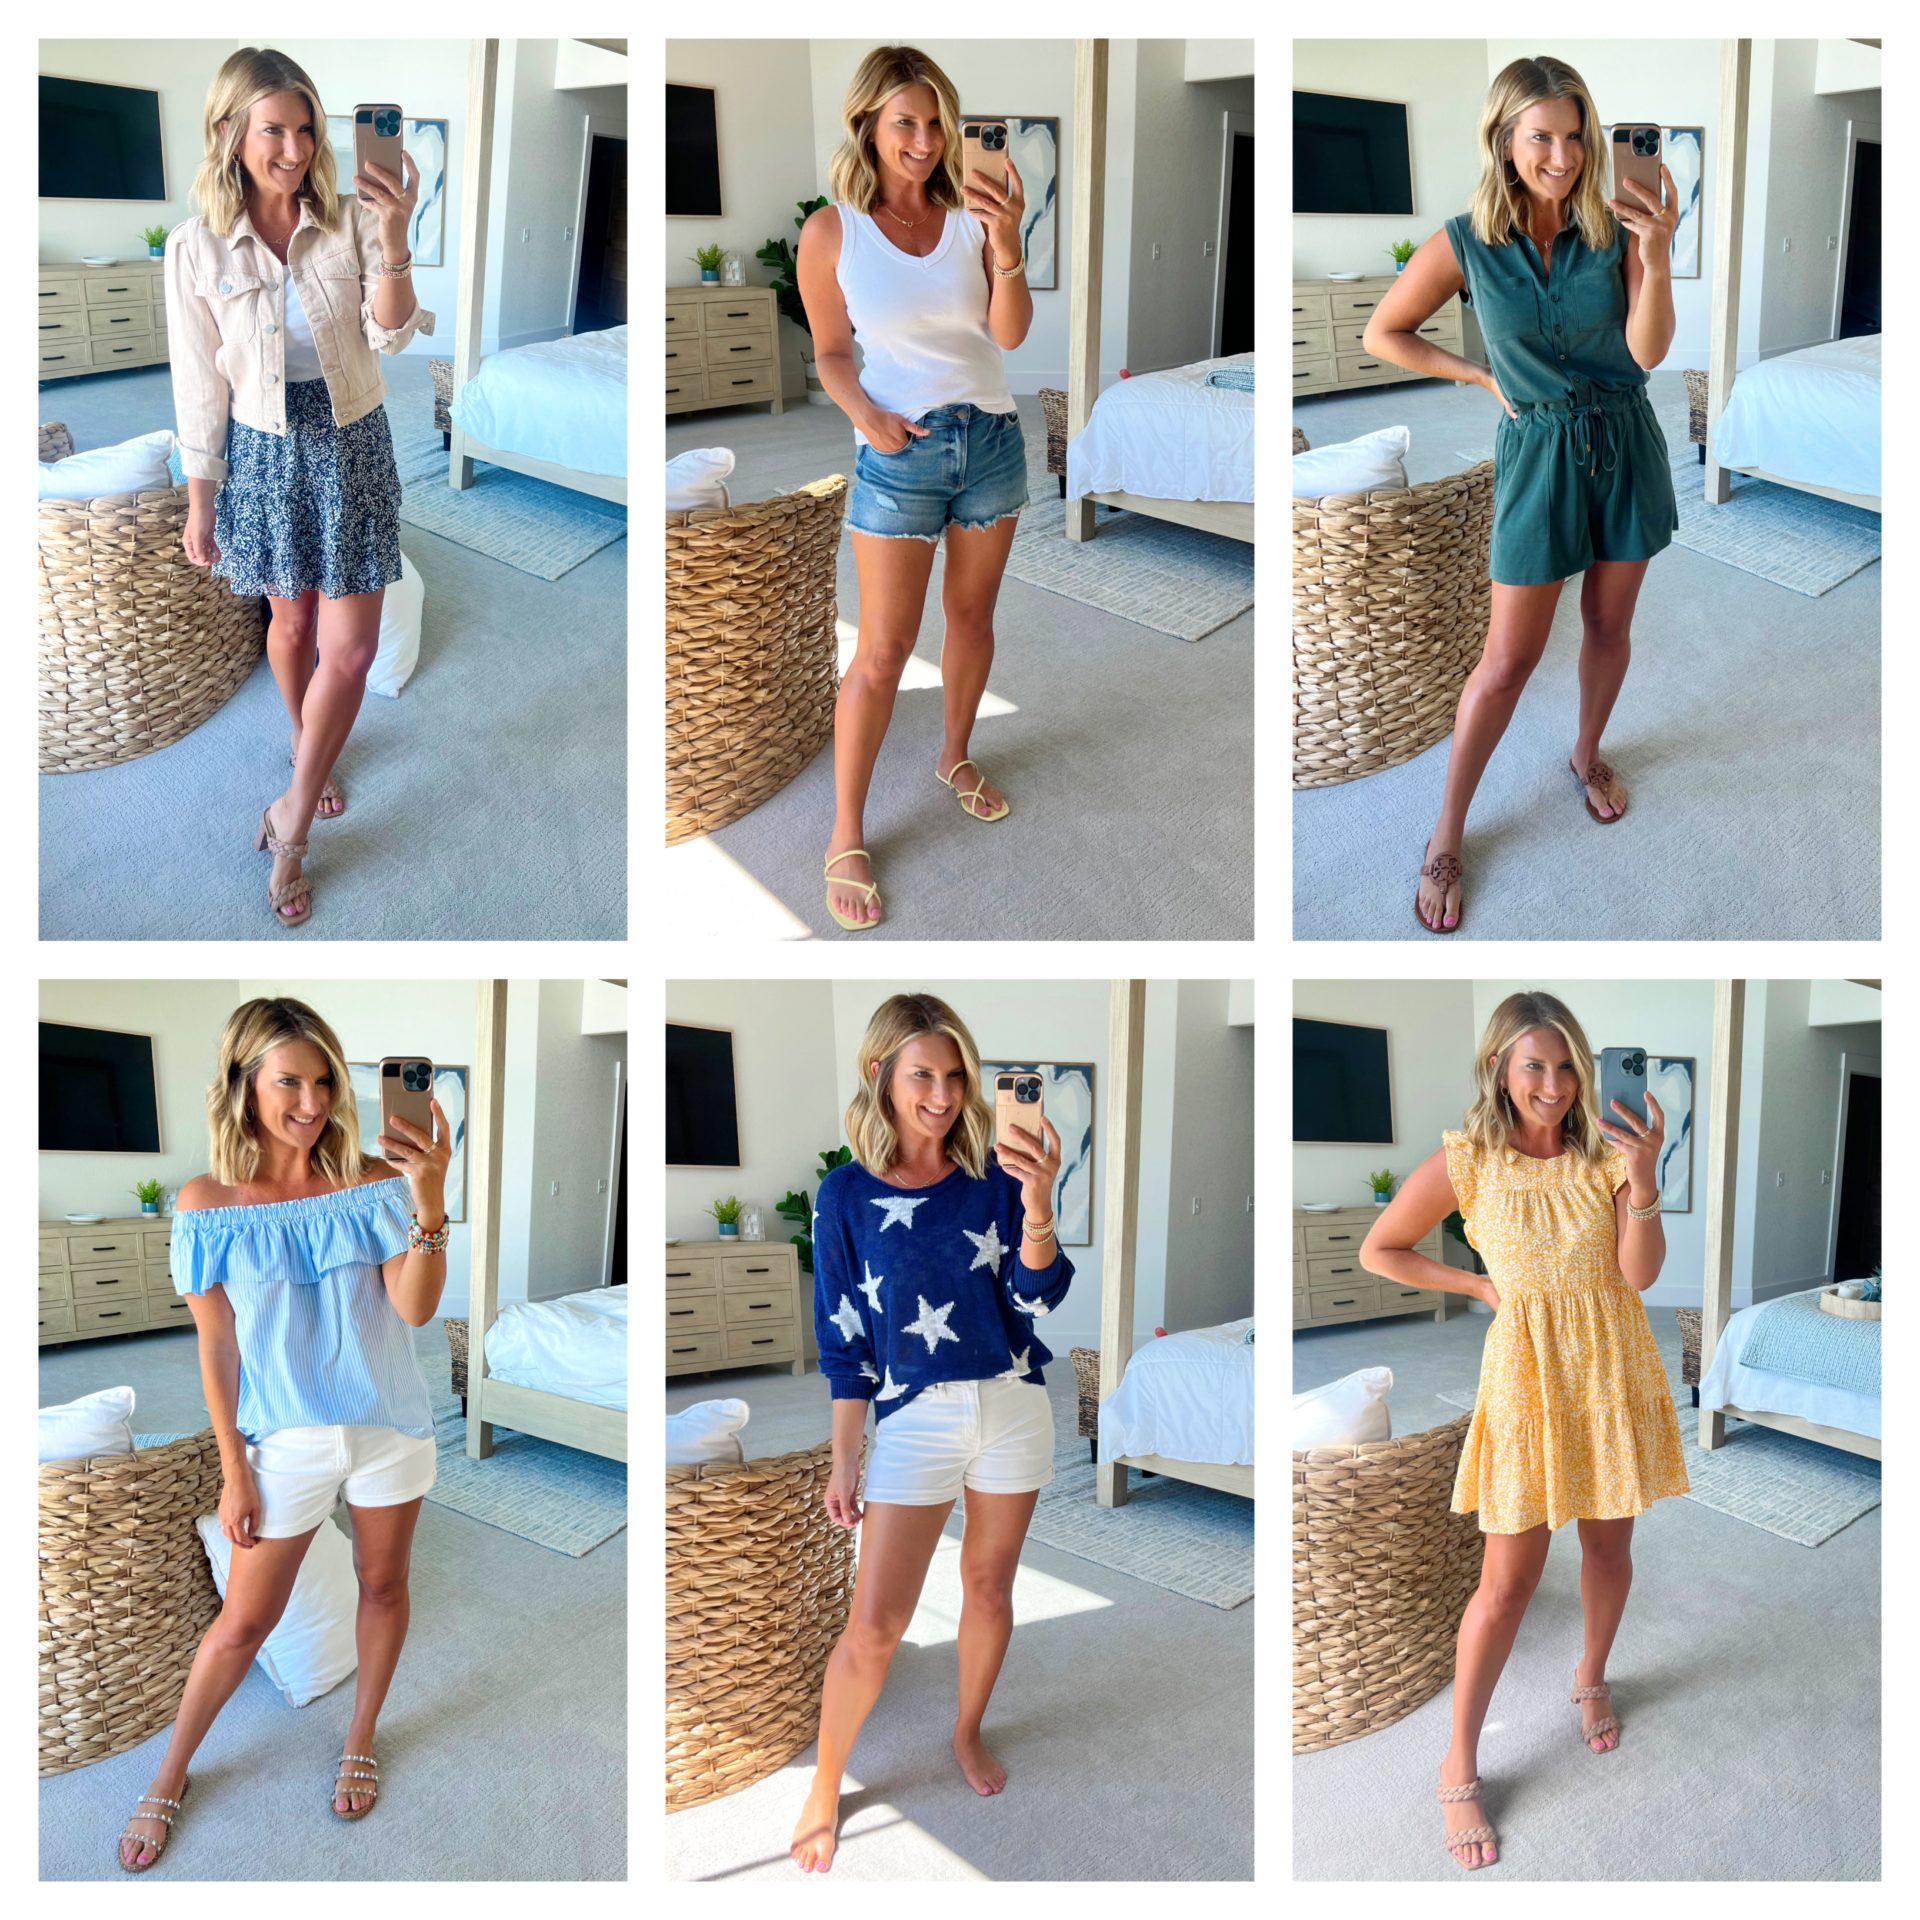 10 Girls' Summer Fashion Outfits Only $10 Each - A Few Shortcuts